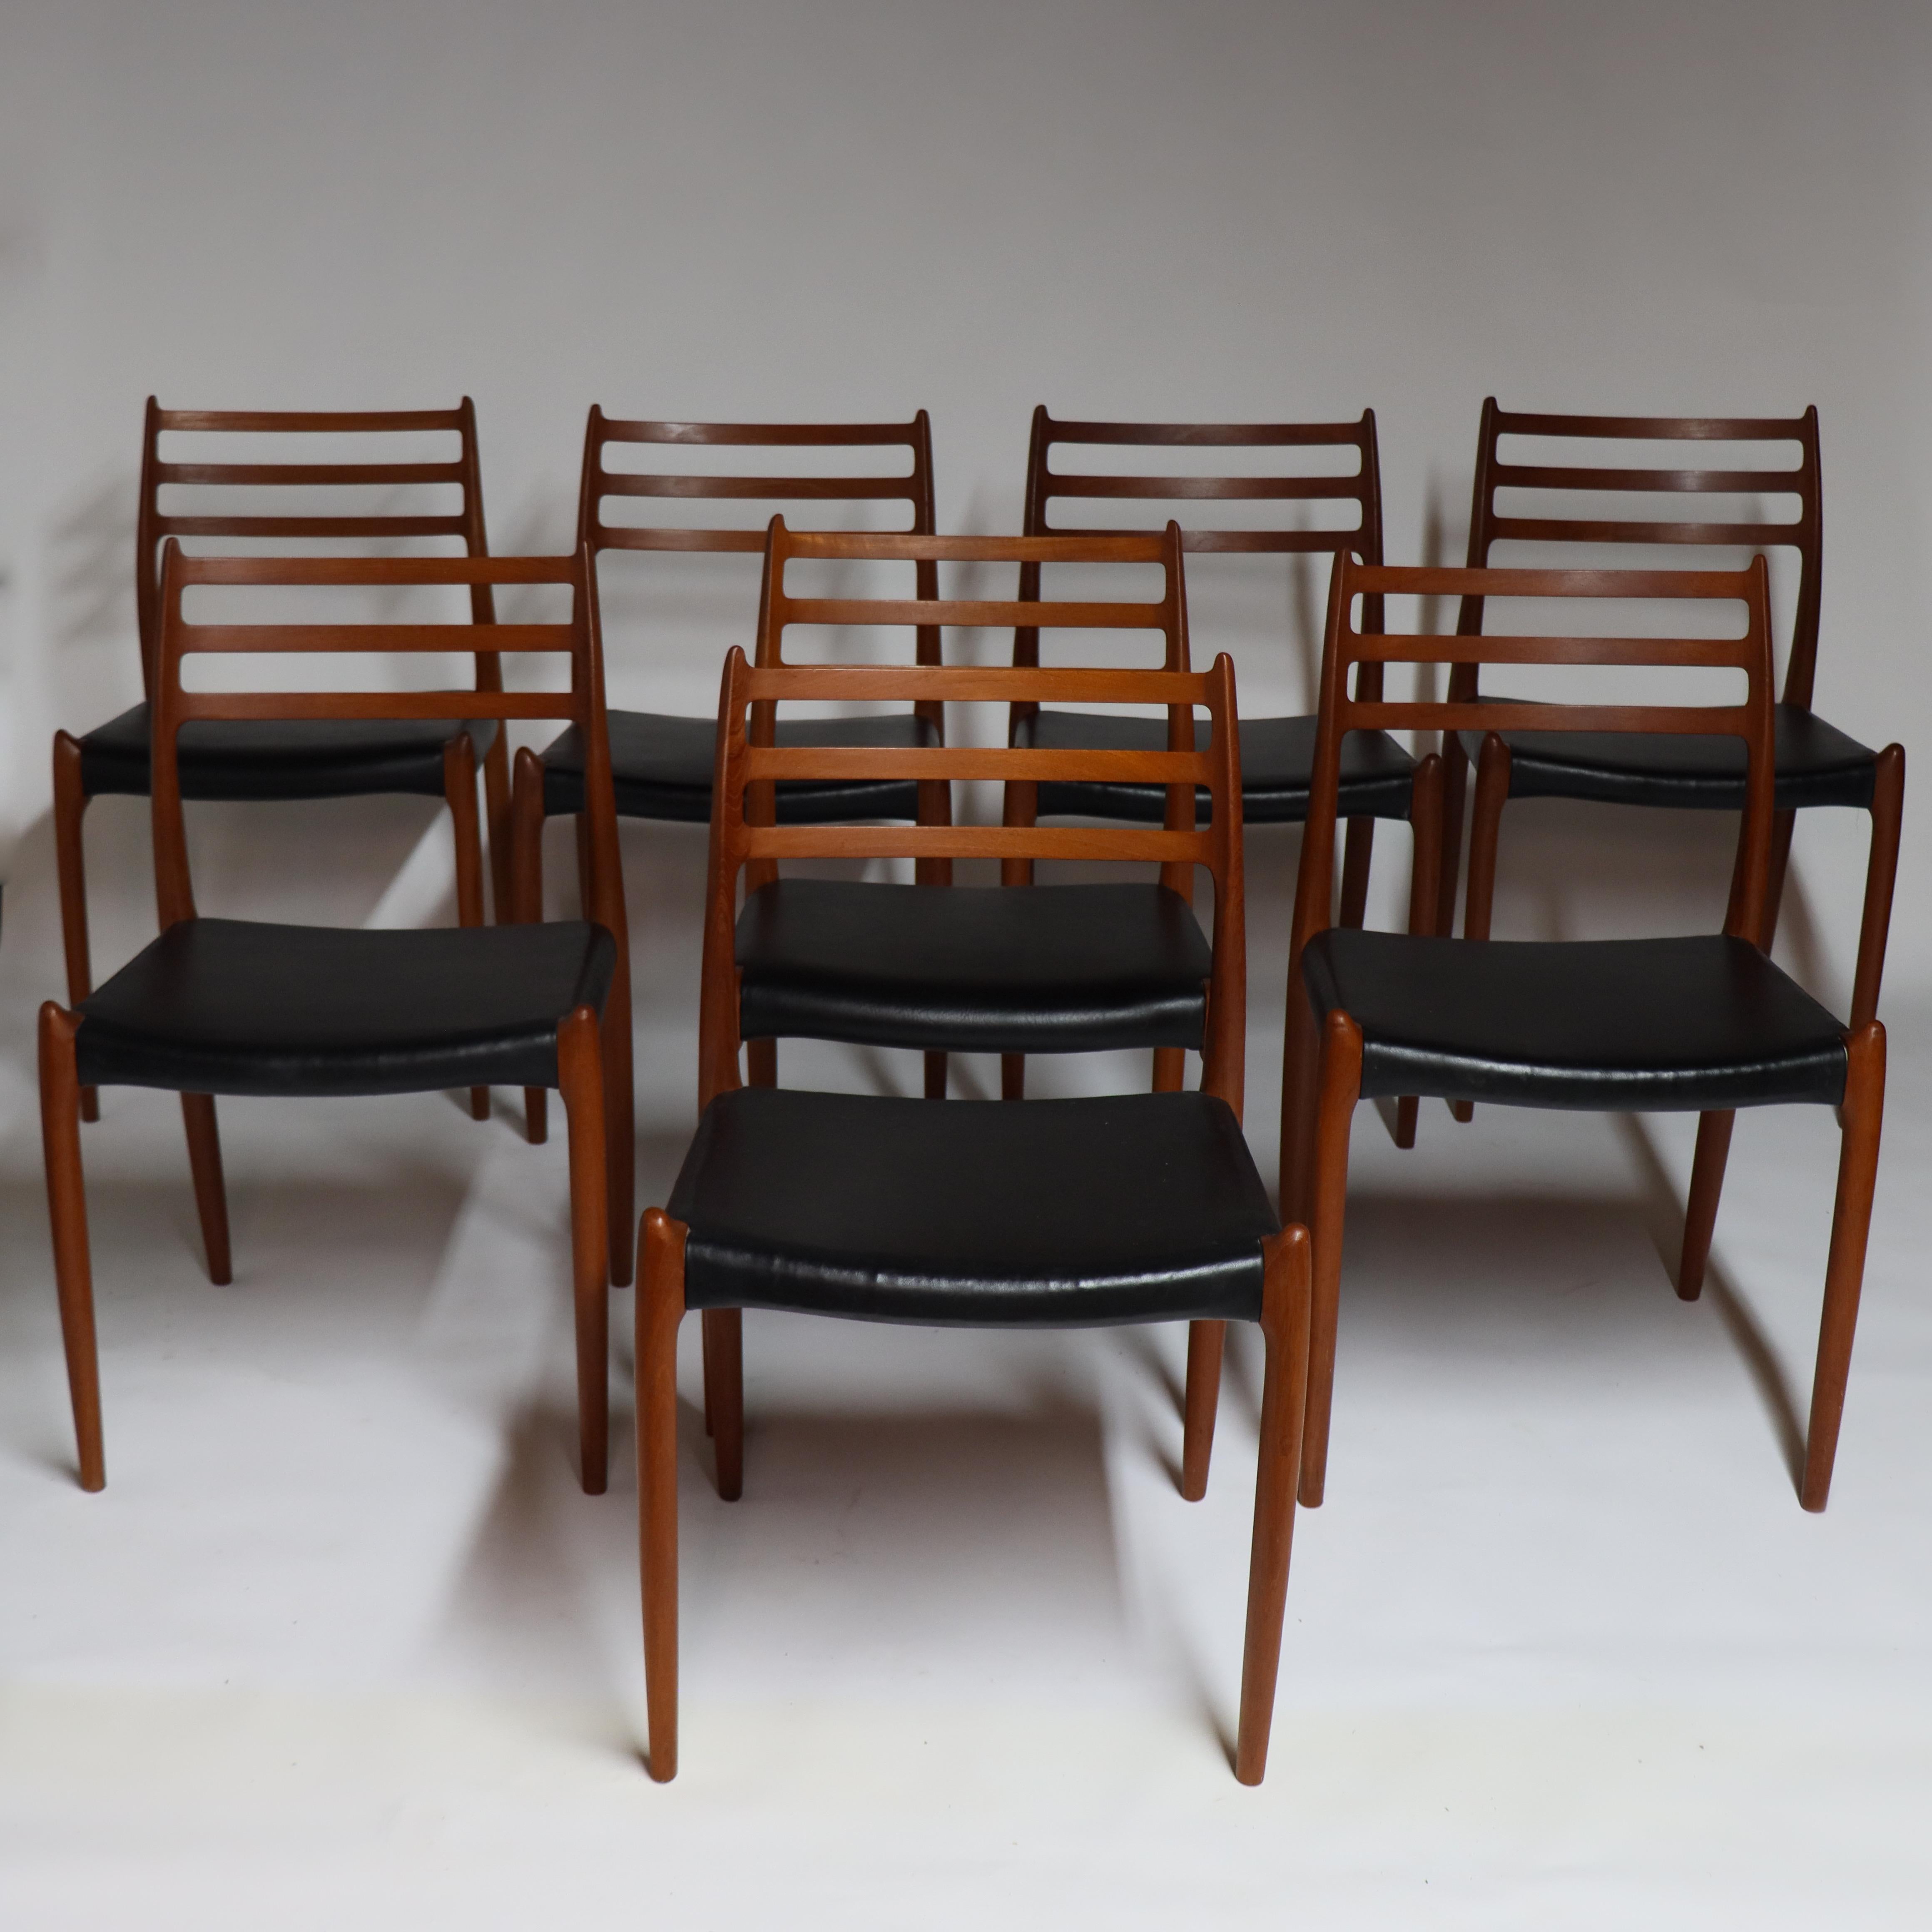 Handsome set of 8 dining chairs designed by Neils O. Møller for J.L. Møller, Denmark - 1962 (Model 78)

These beautiful examples are executed in old growth teak and have a beautiful coloring. Model 78 is Møller’s most iconic chair design of his